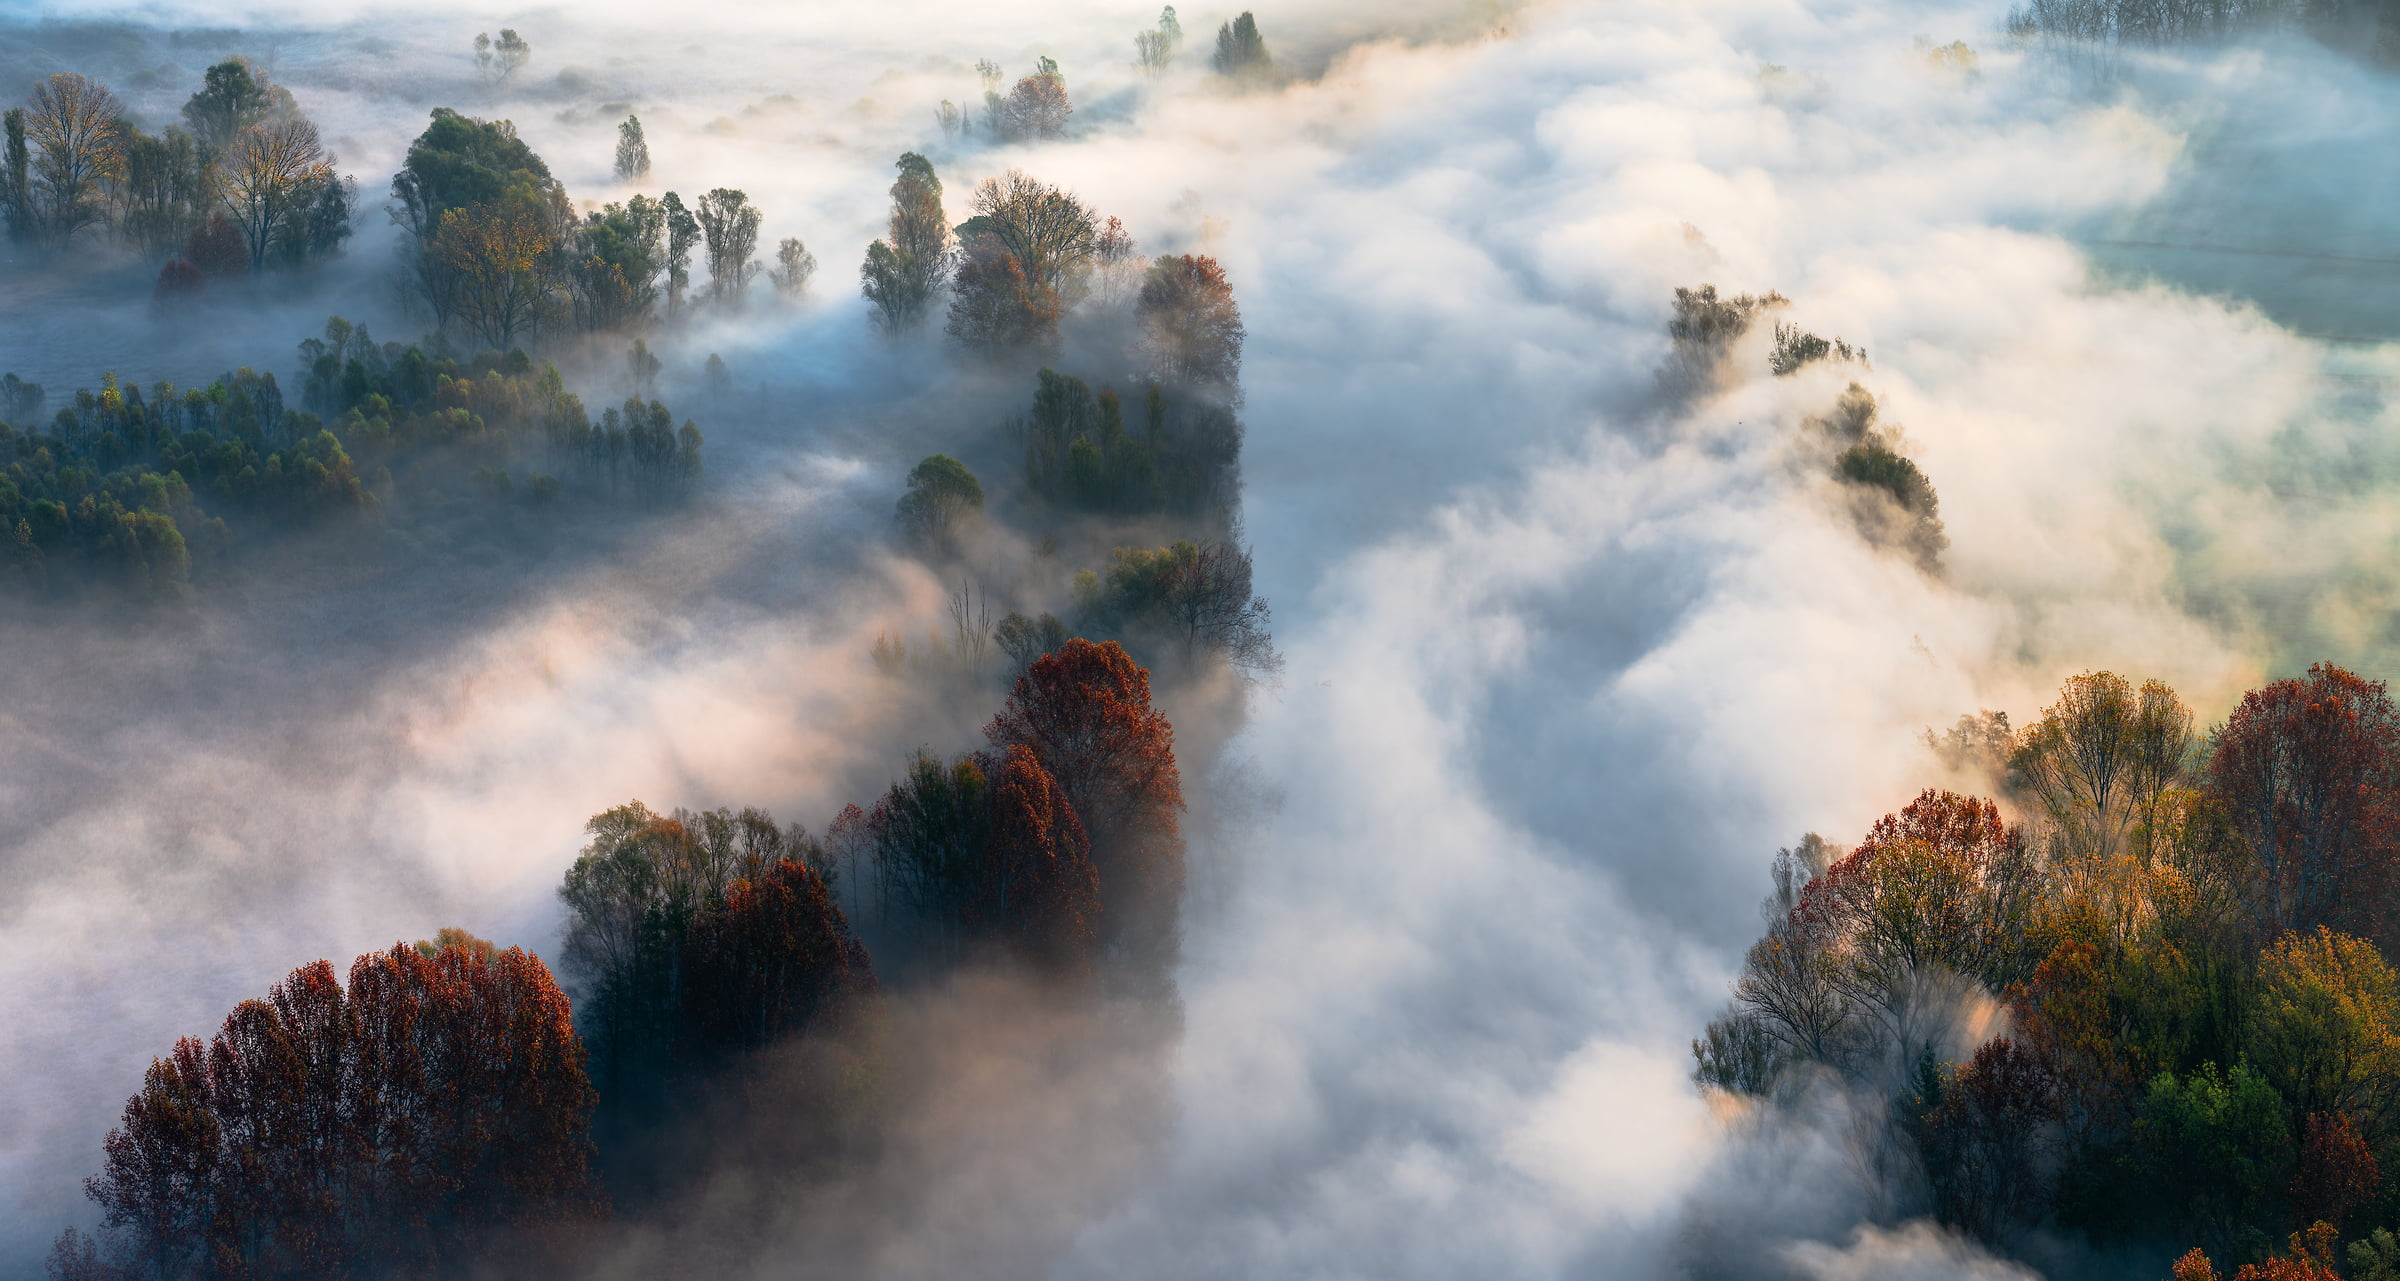 169 megapixels! A very high resolution, large-format VAST photo print of a misty landscape; photograph created by Ennio Pozzetti in Airuno, Lombardia, Italy